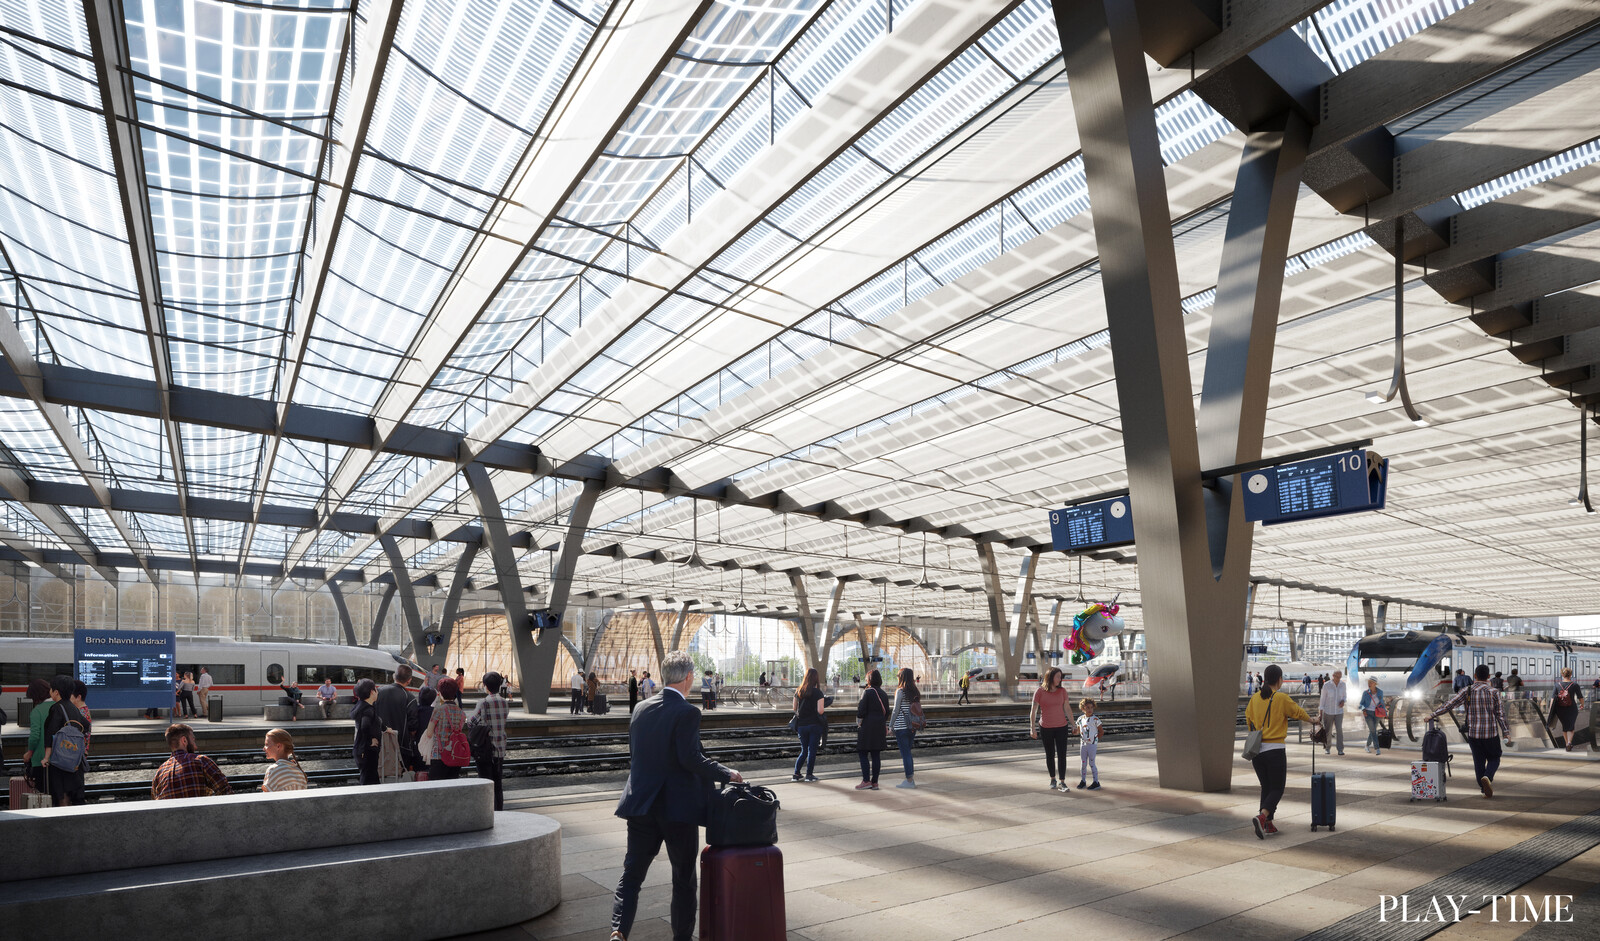 New Brno main Station by West8 design and Benthem Crouwel Architects. Image by Play-time